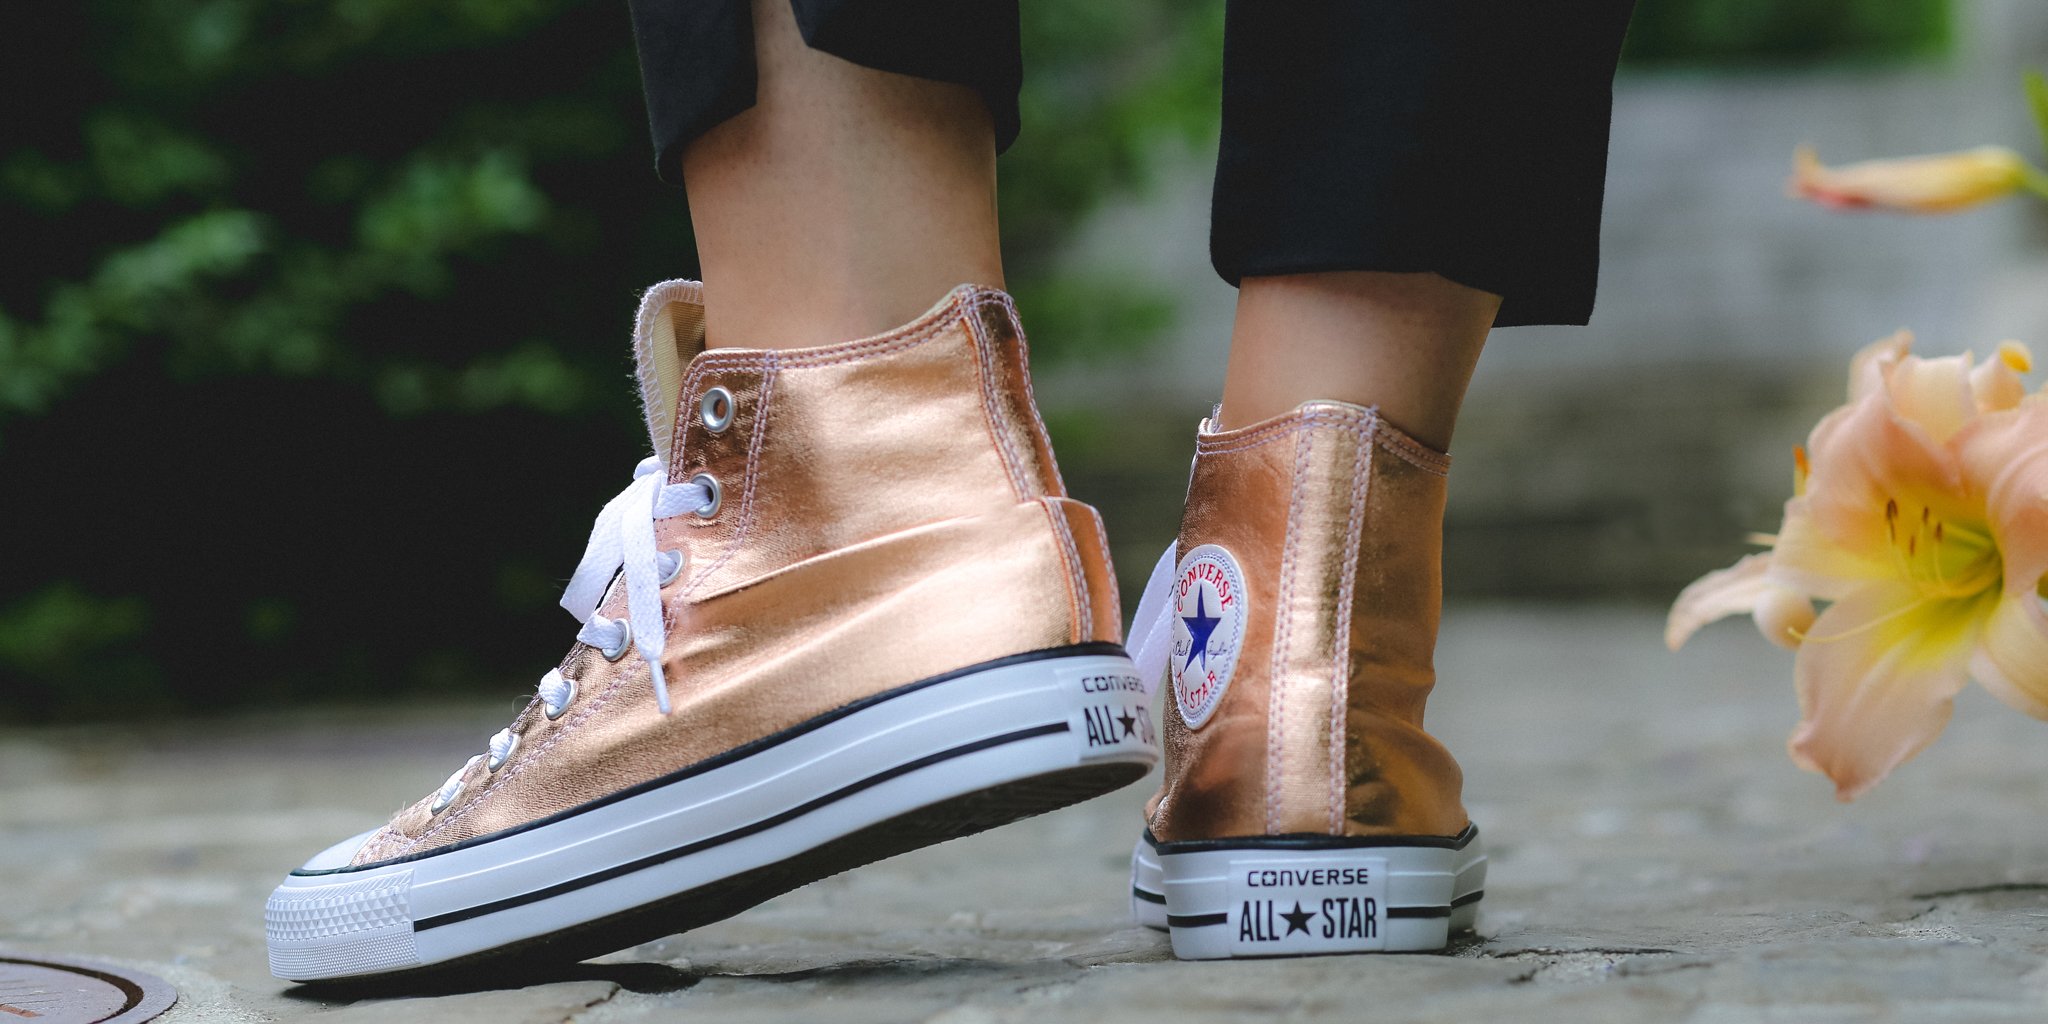 Pensionista temporal Terraplén Titolo on Twitter: "NEW IN! Converse All Star HI - Metallic Sunset  Glow/White SHOP HERE: https://t.co/juKm595URP https://t.co/P1rRf16TX4" /  Twitter